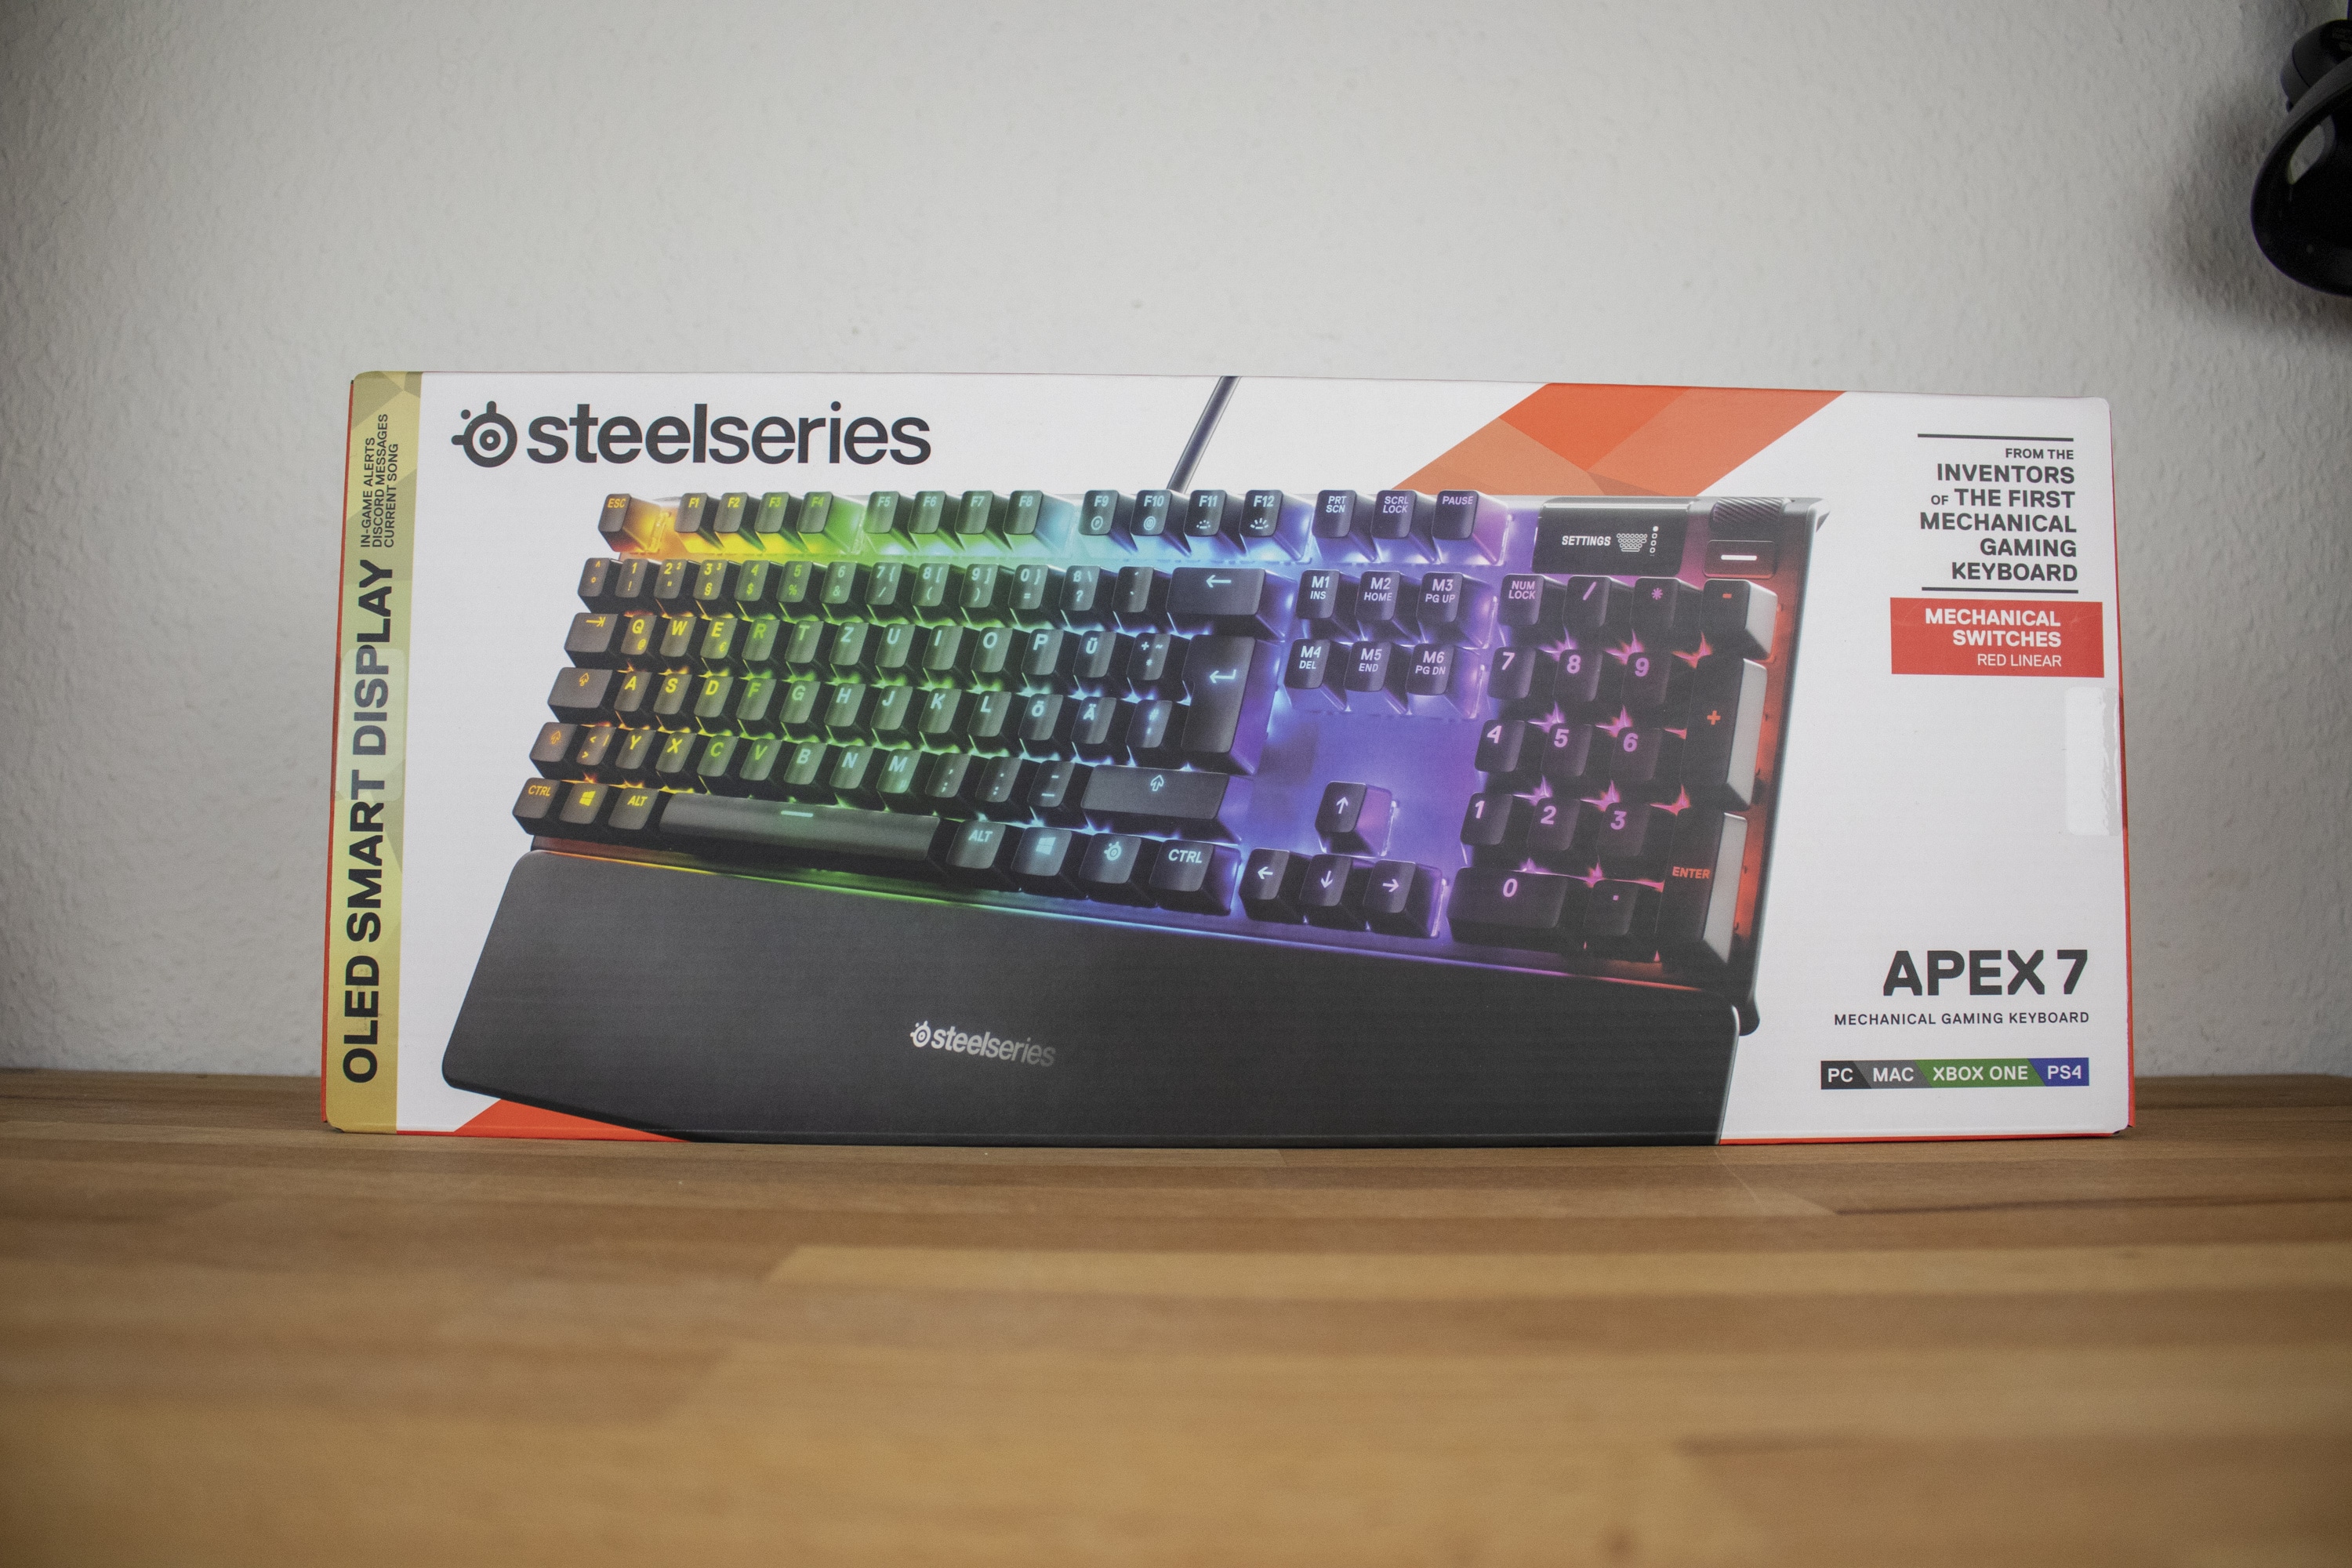 sund fornuft tjene ambulance SteelSeries Apex 7 Review: Gaming Keyboard with OLED Screen